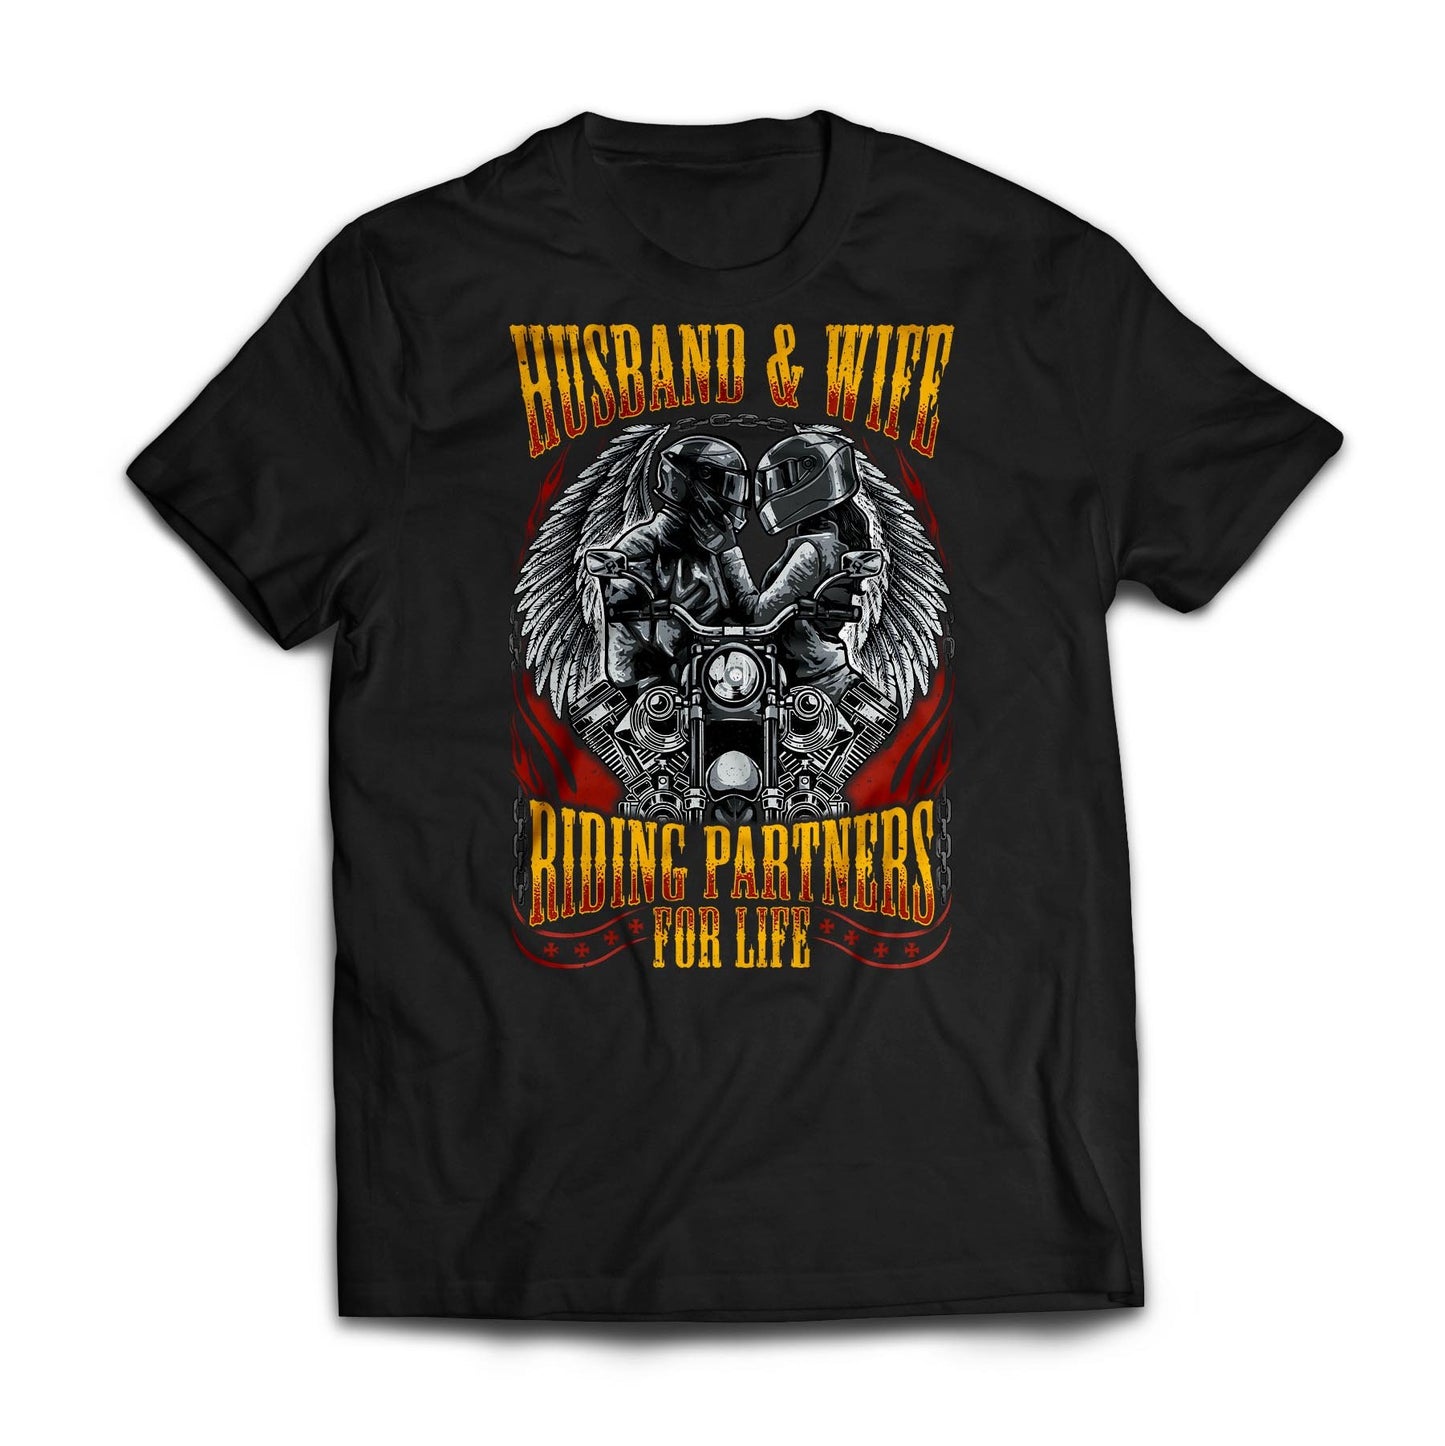 Husband & Wife - Riding Partners For Life - Standard T-shirt